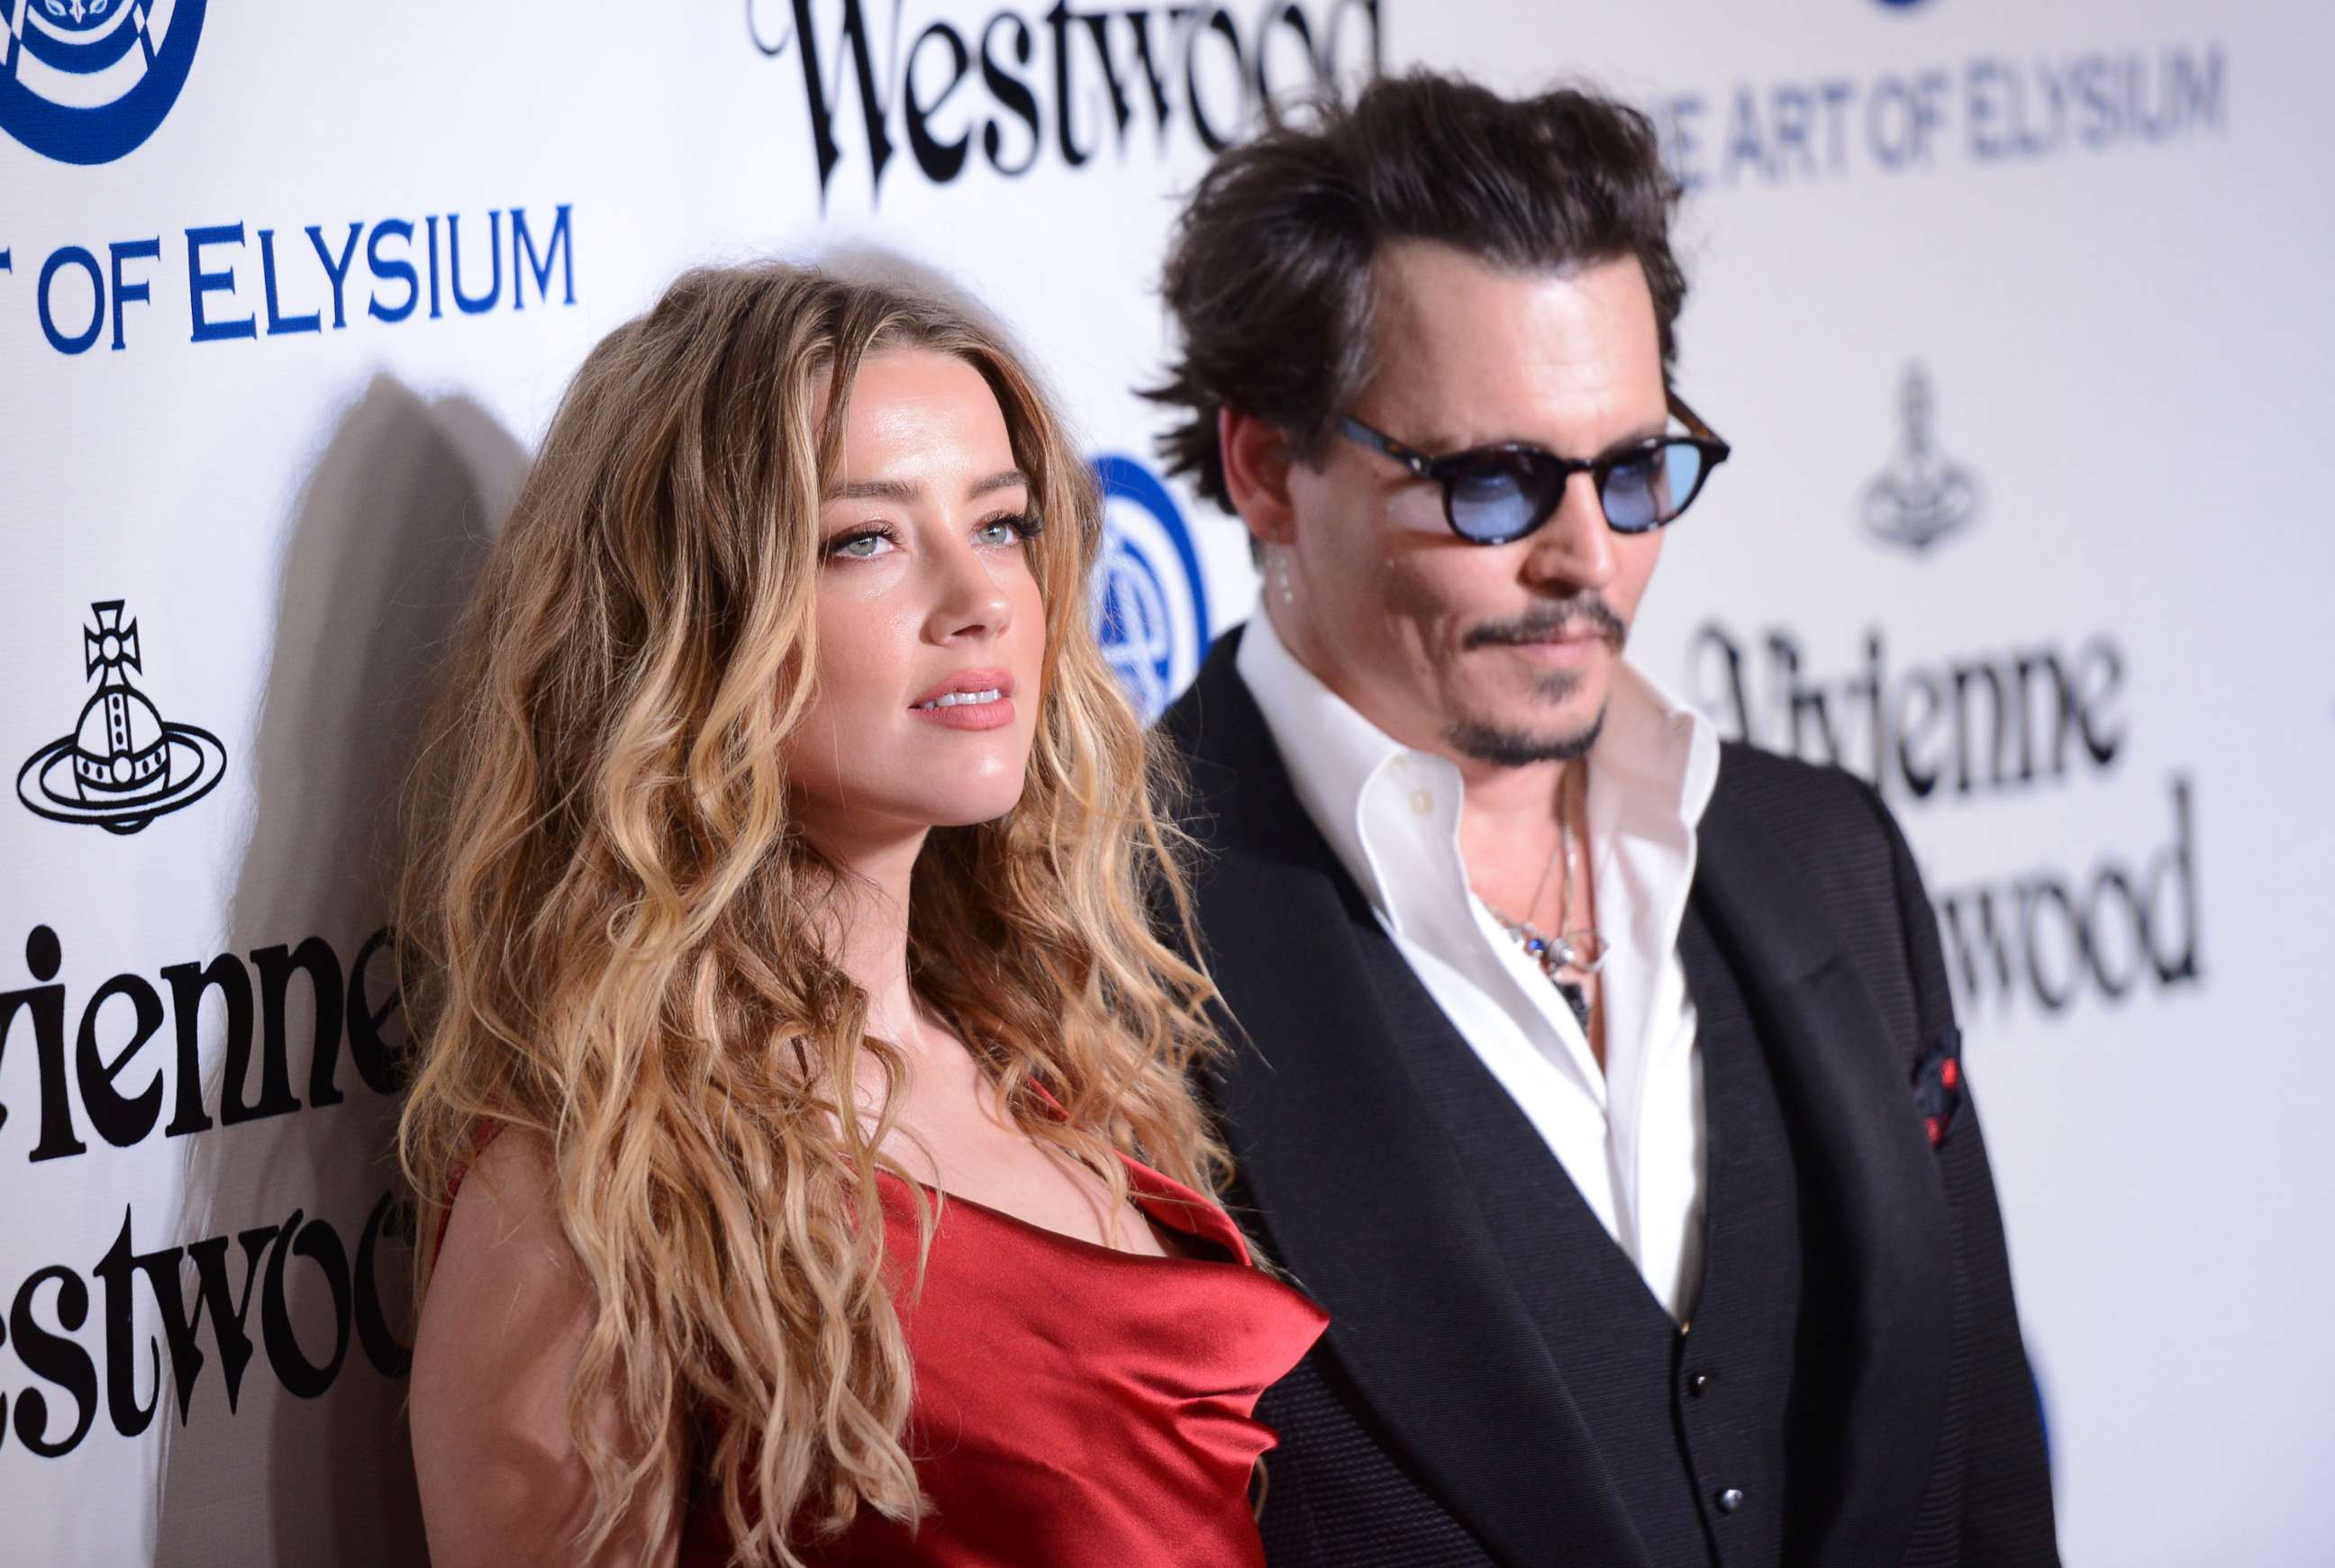 PHOTO: Amber Heard and Johnny Depp attend the Art of Elysium 2016 HEAVEN Gala  in this Jan. 9, 2016 file photo in Culver City, Calif.